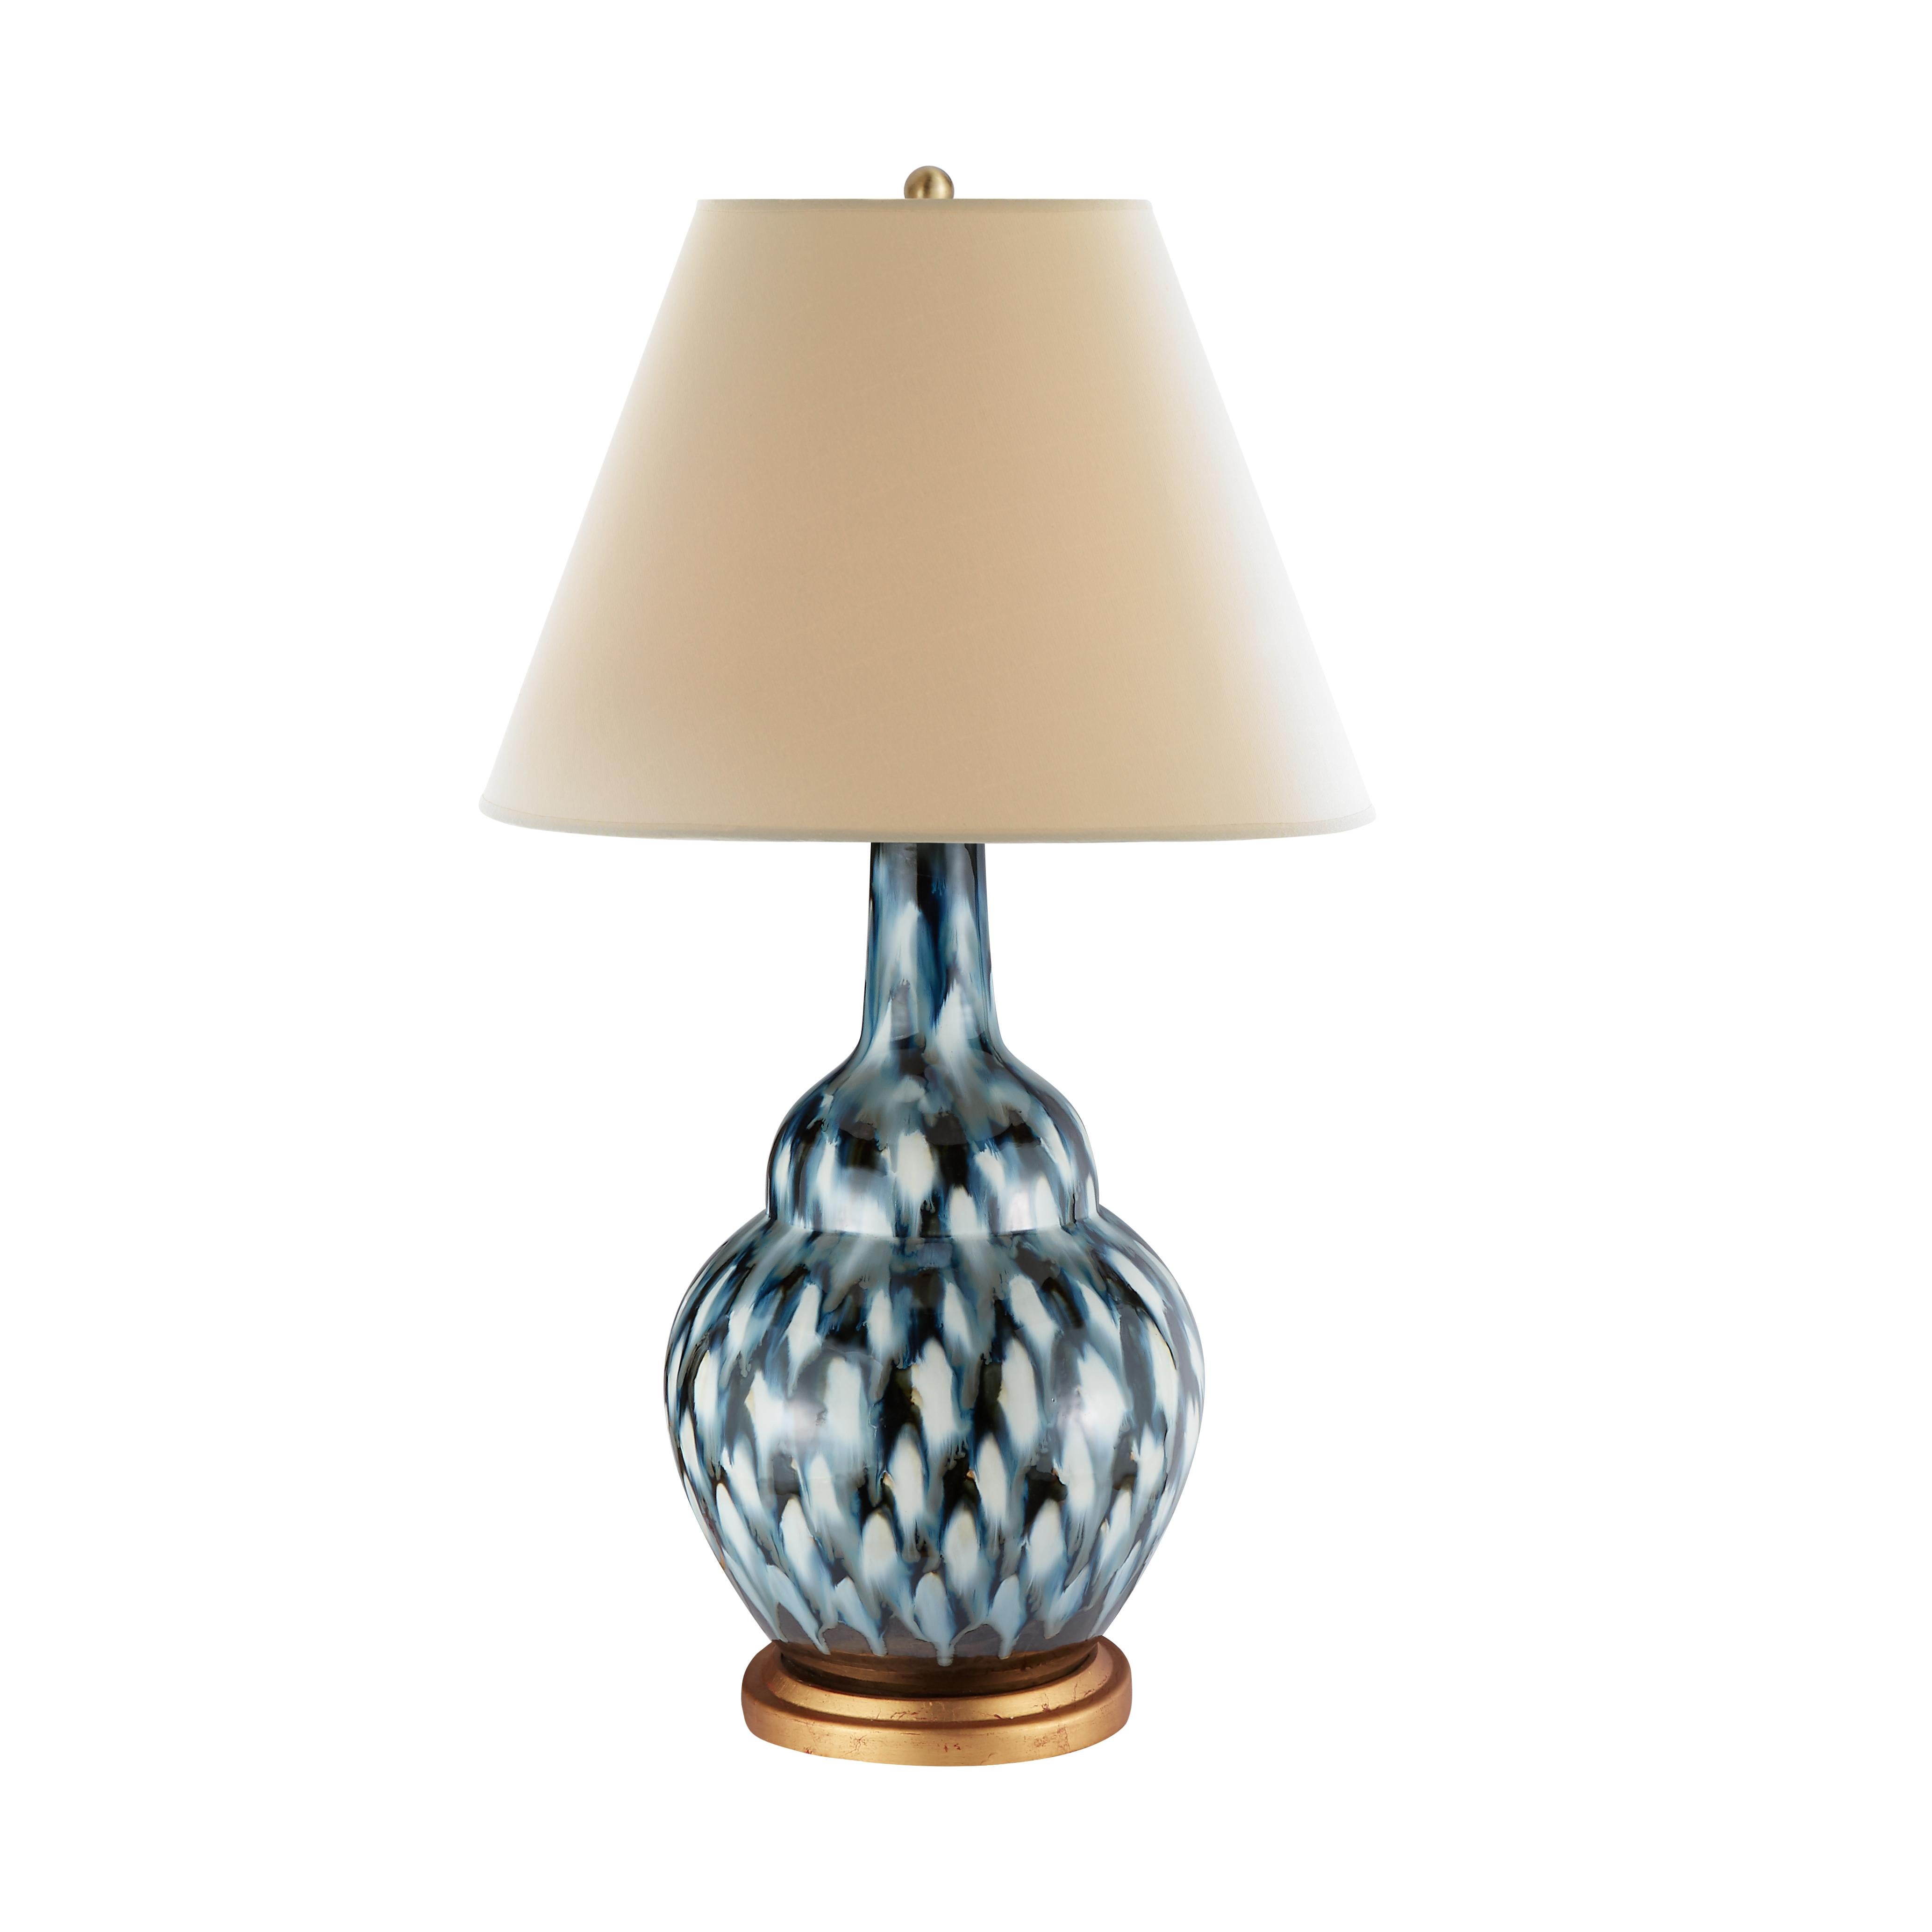 The classical silhouette of our Pheasant Feather lamp adds a graceful, subdued ambiance to any side table. The lamp’s ceramic vase is hand-painted in deep blue tones before a final glazing and firing to produce this stunning allover pattern. It is